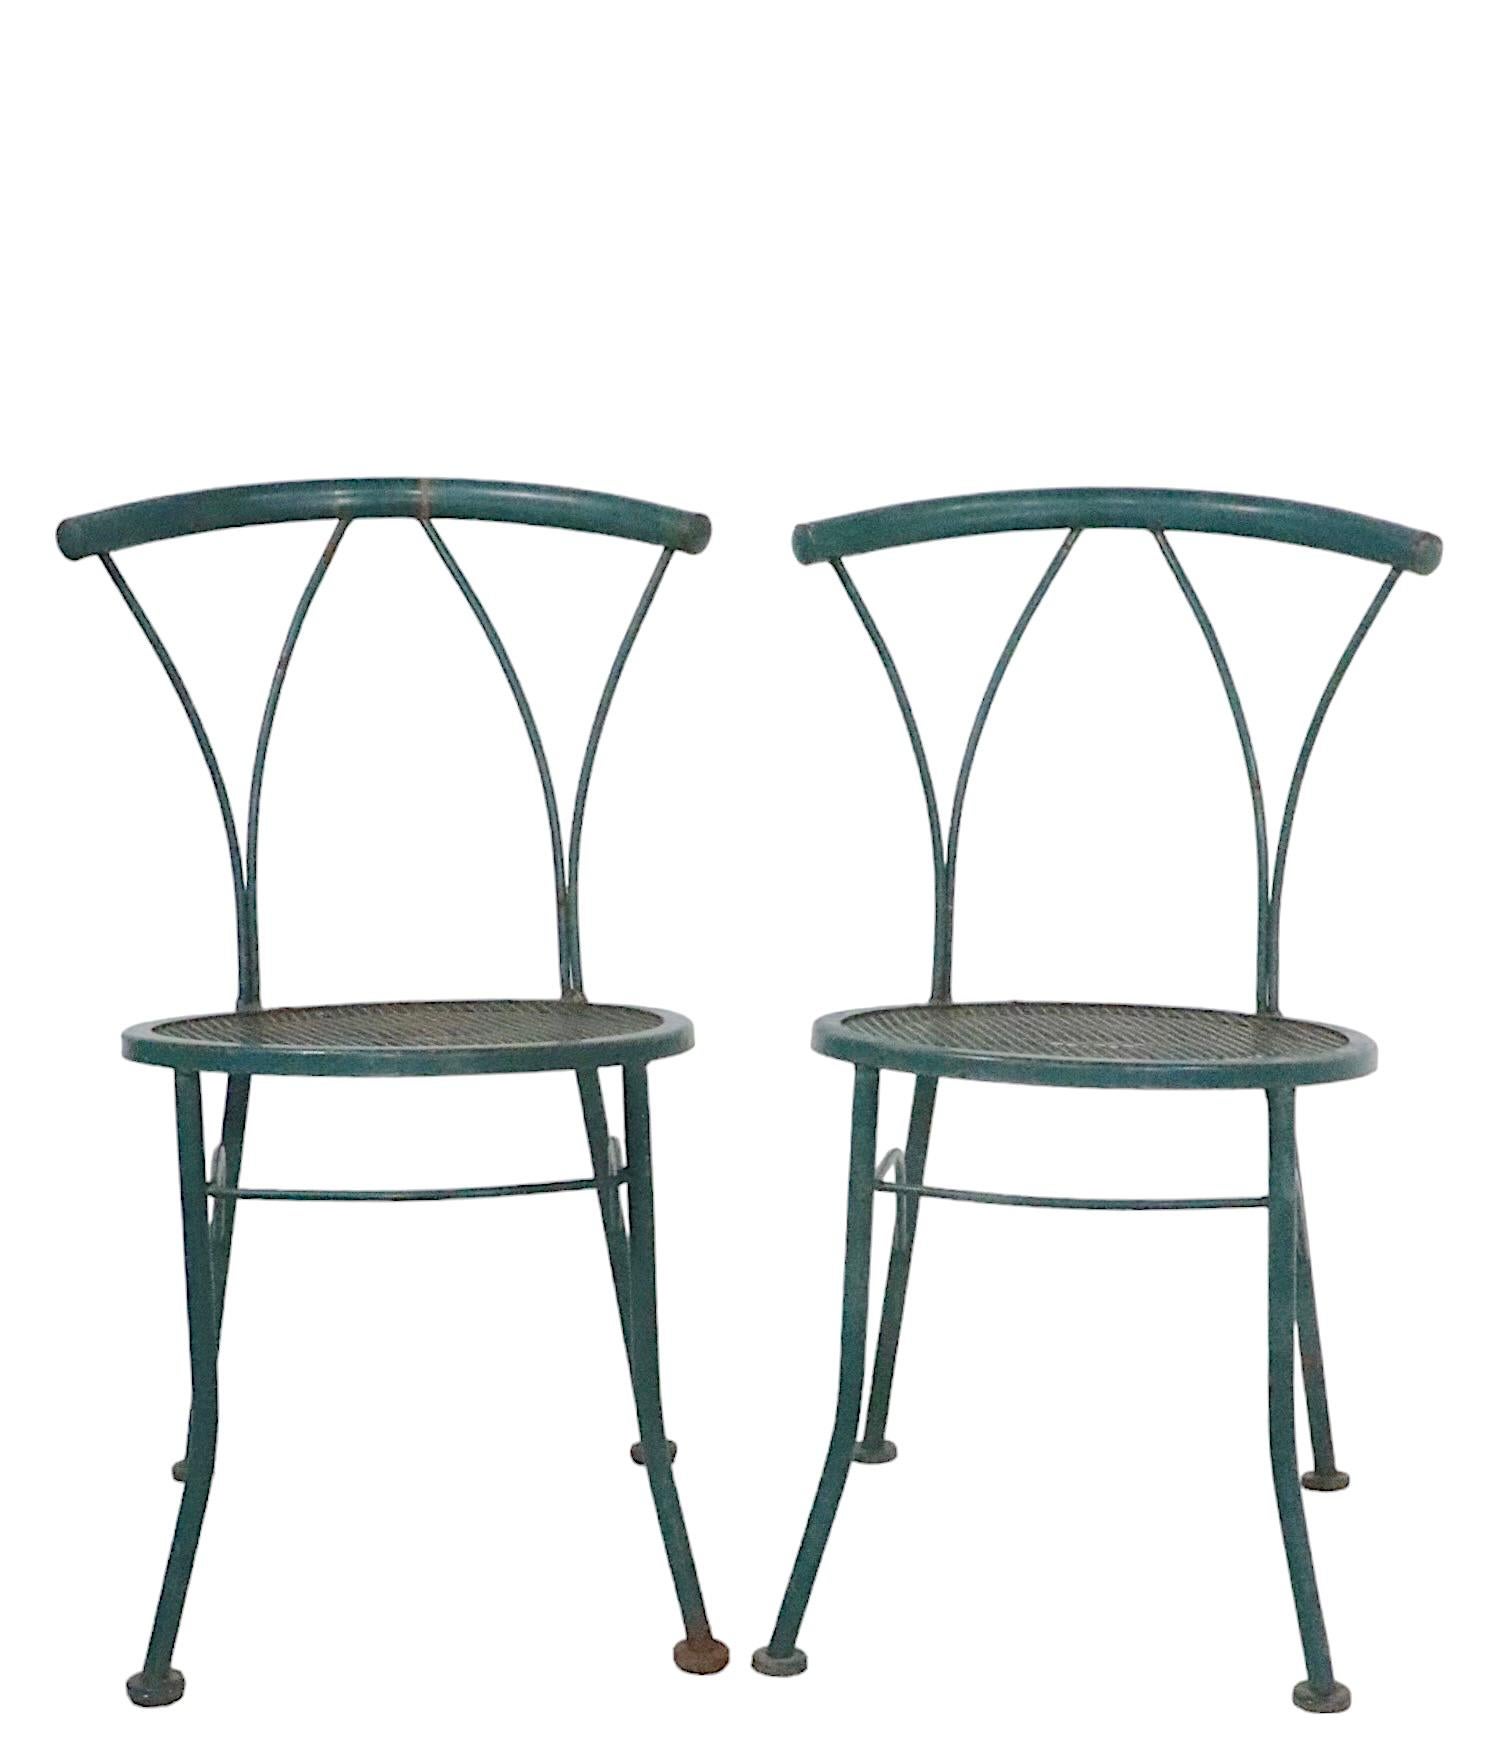 Pr. Wrought Iron and Metal Mesh Garden Patio Poolside Bistro Cafe  Dining Chairs For Sale 2